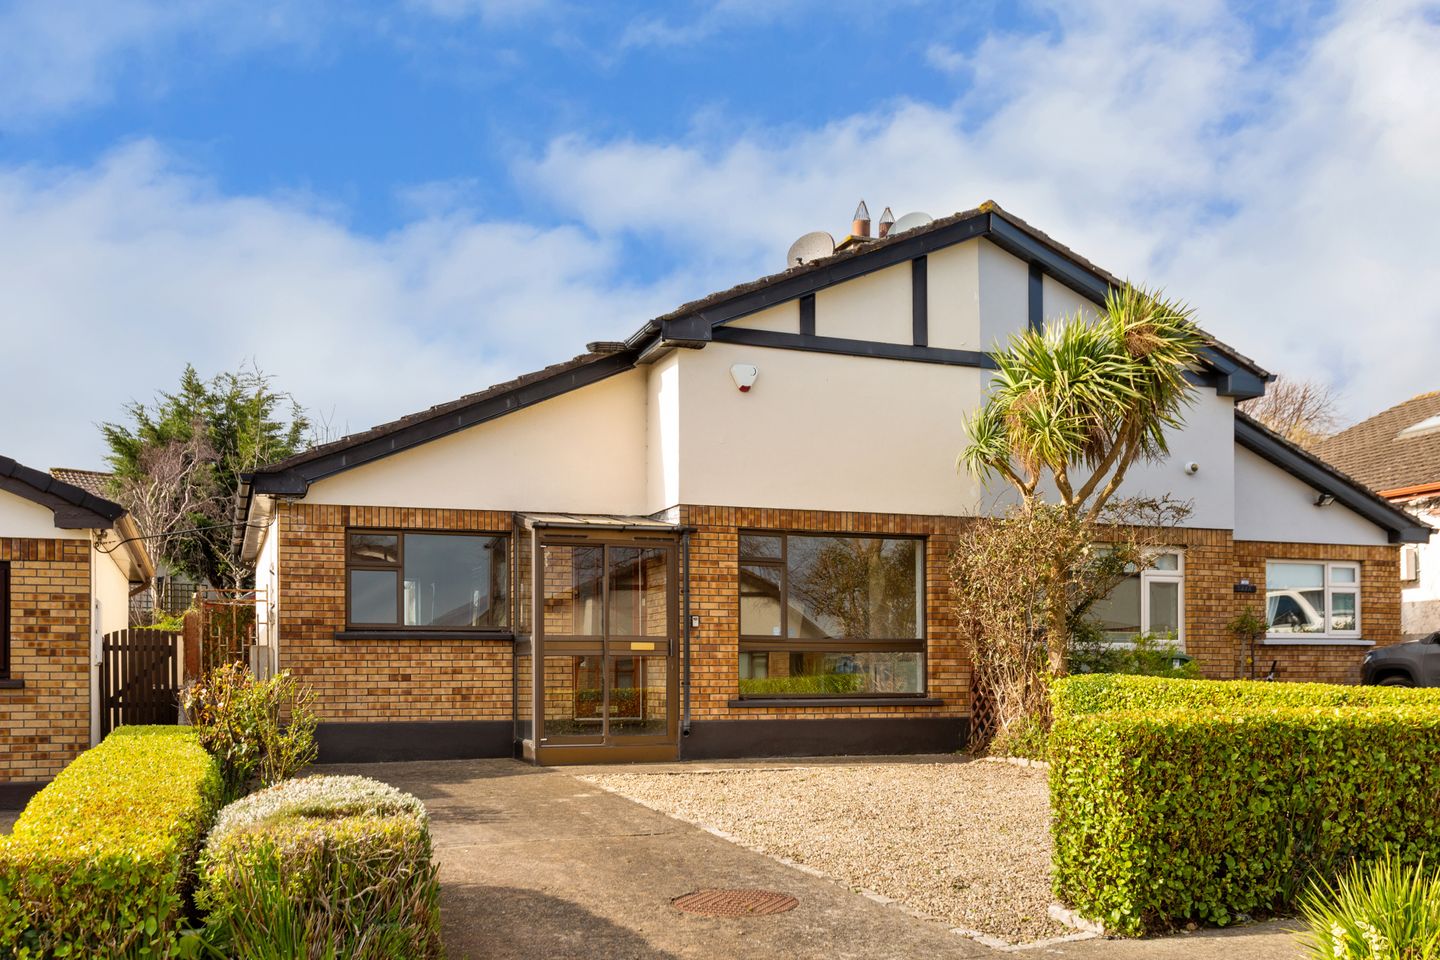 161 Redford Park, Rathdown Lower, Greystones, Co. Wicklow, A63HT02